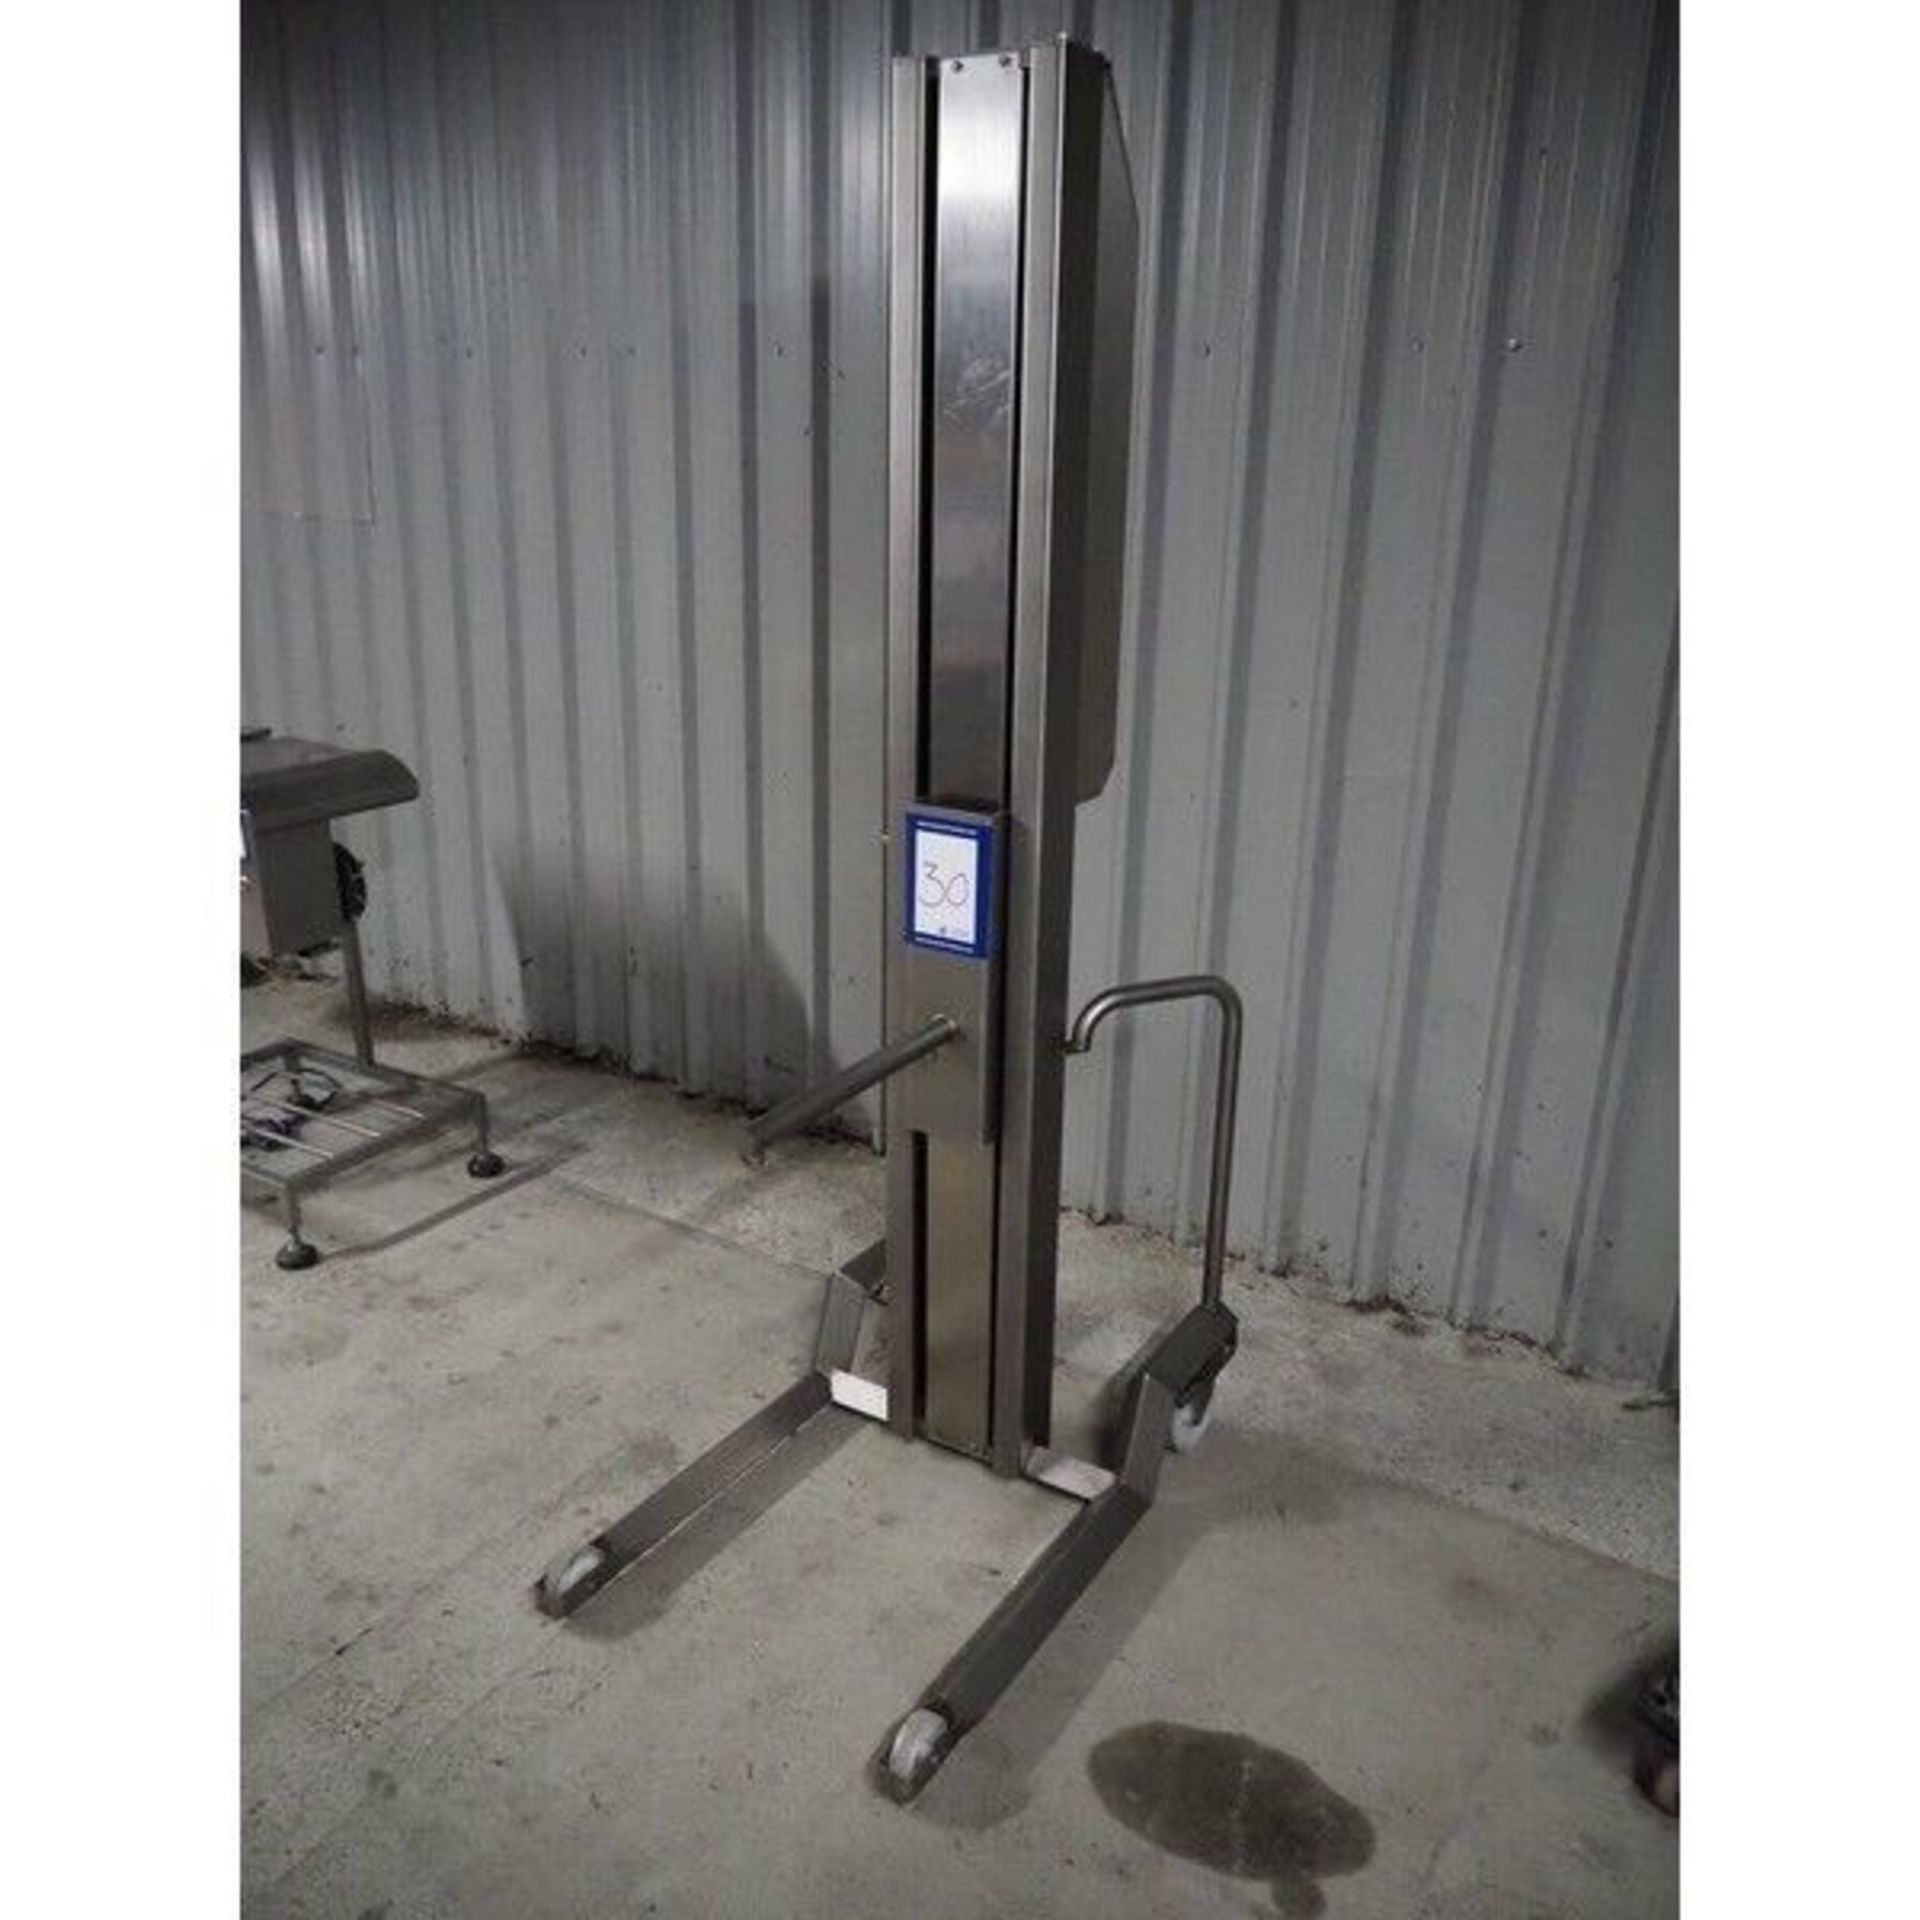 Syspal Manual Film Reel Lifter, 220 lb. SWL, YOM 2020 (Located Jessup, MD) (Loading Fee $150) - Image 3 of 5